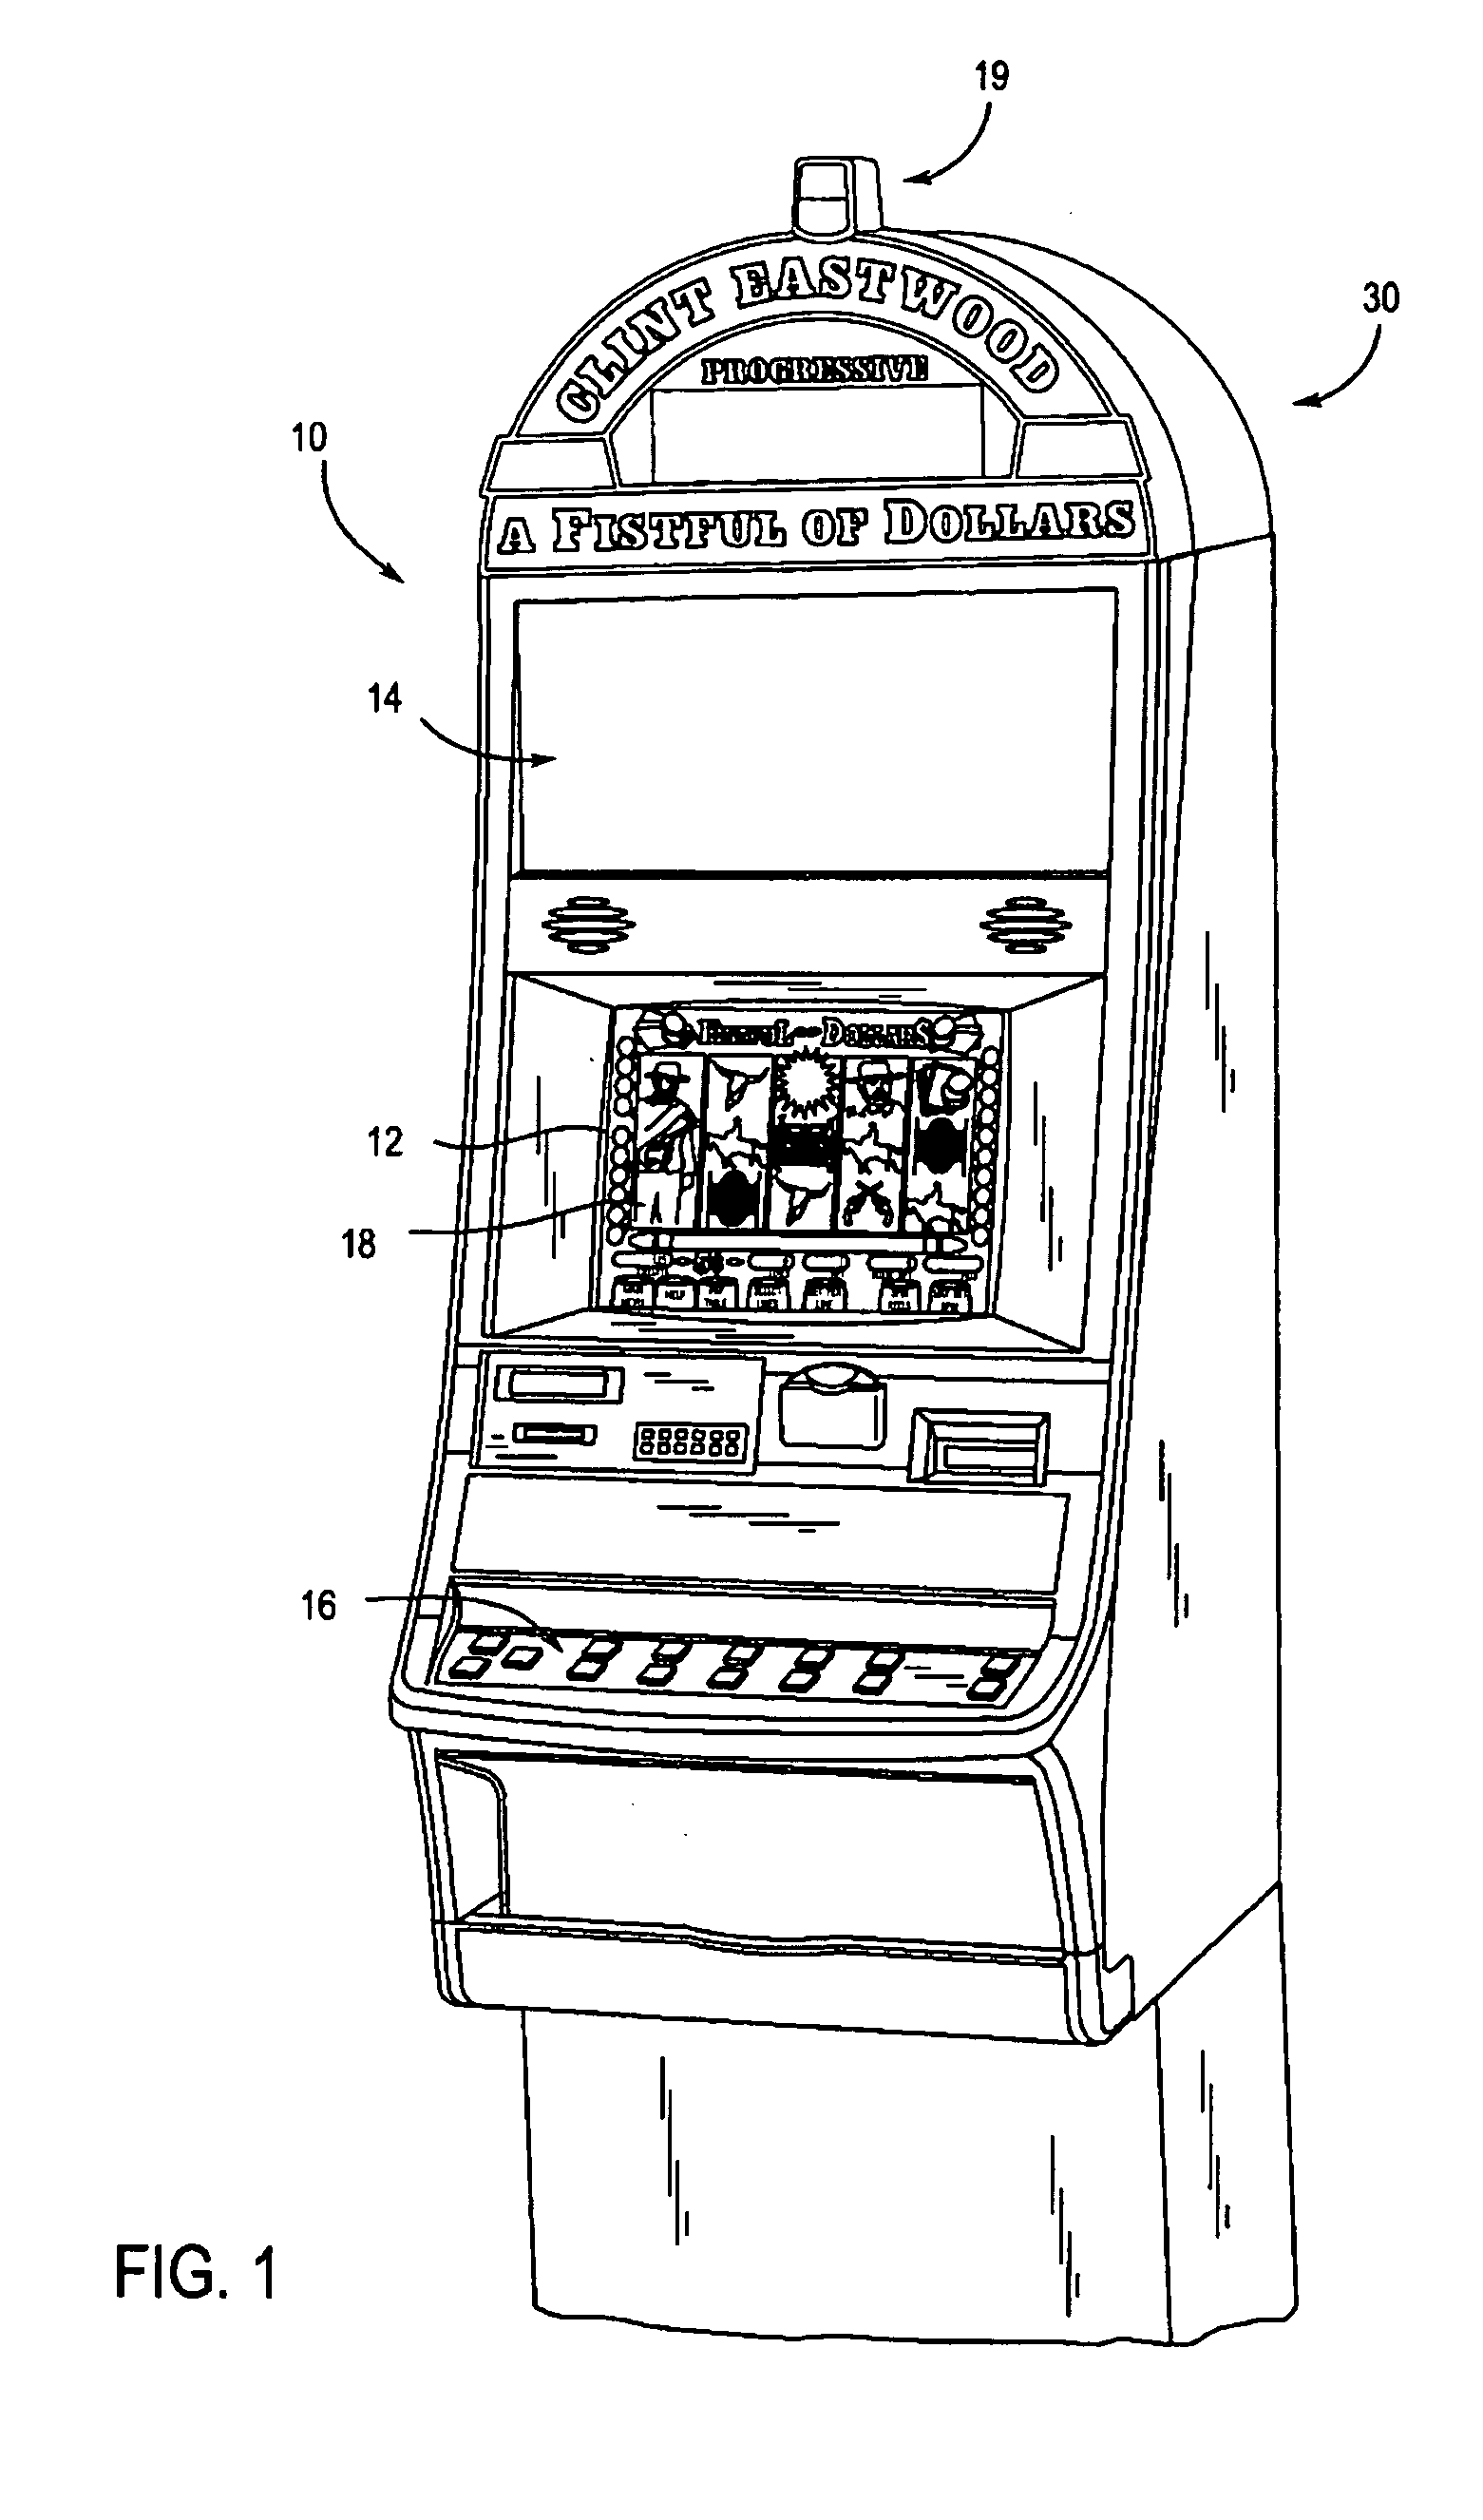 Gaming machine with light altering features